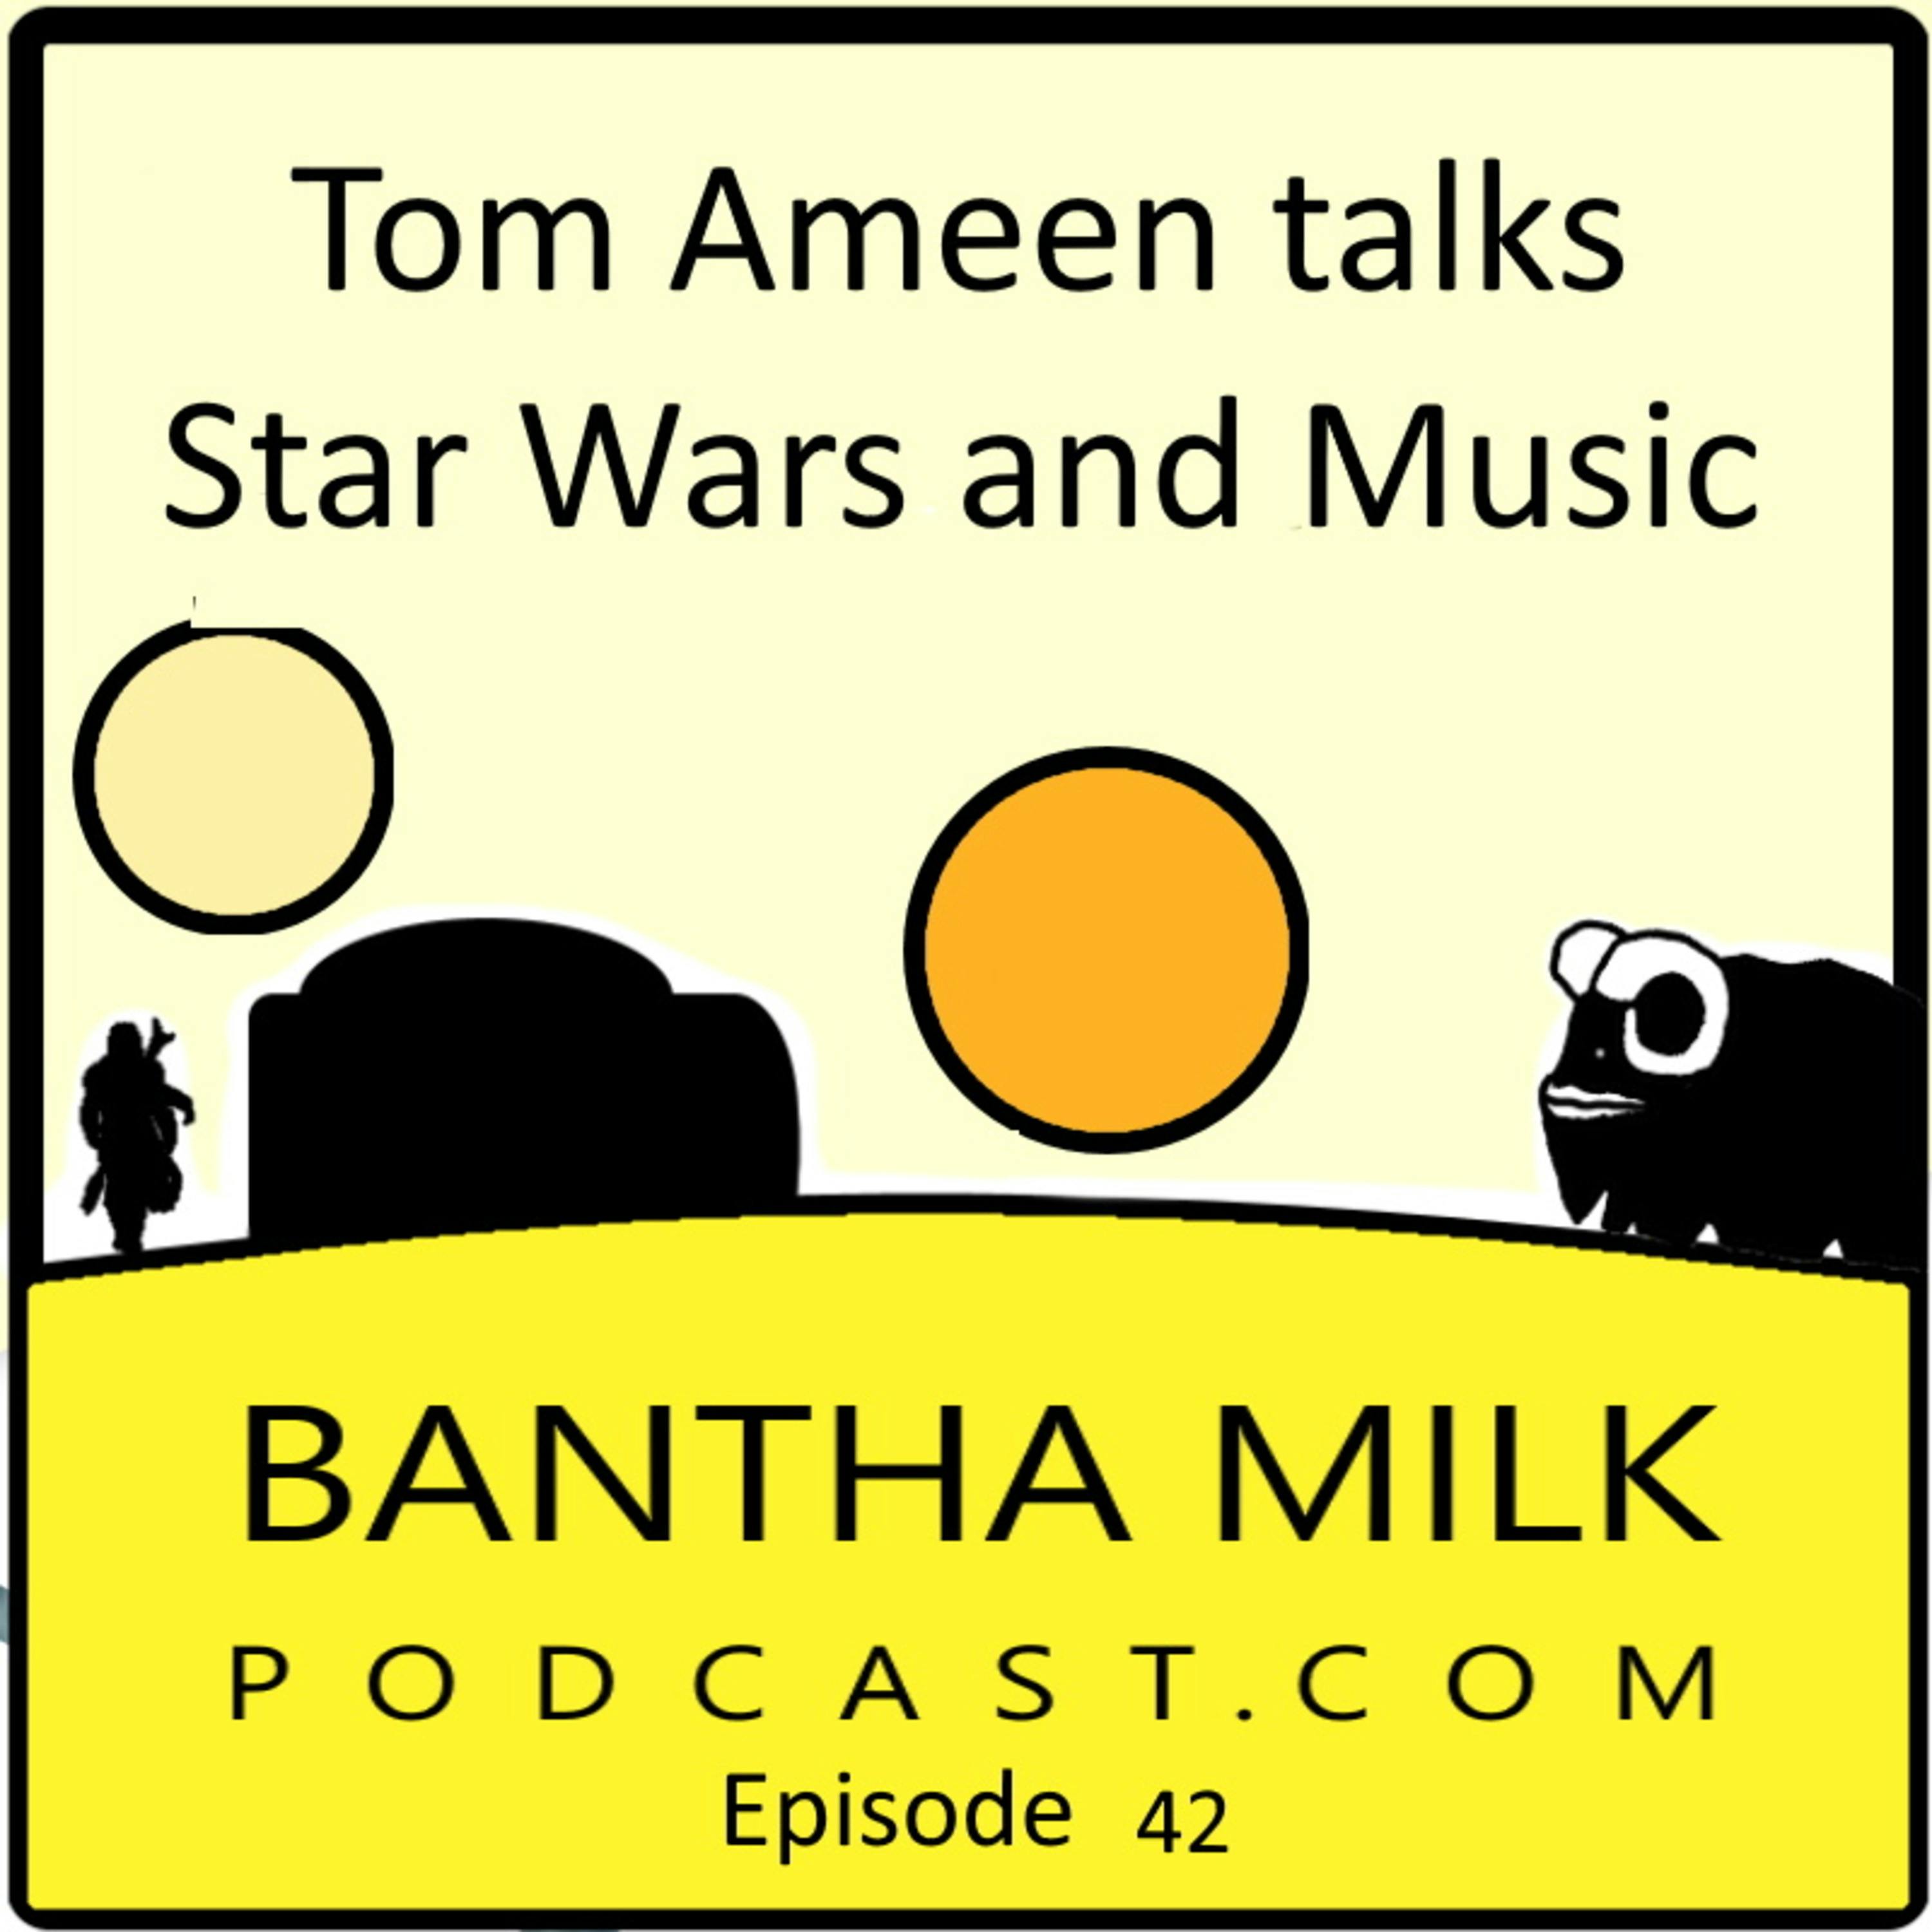 Tom Ameen talks to us about Star Wars music and his love of the genre.